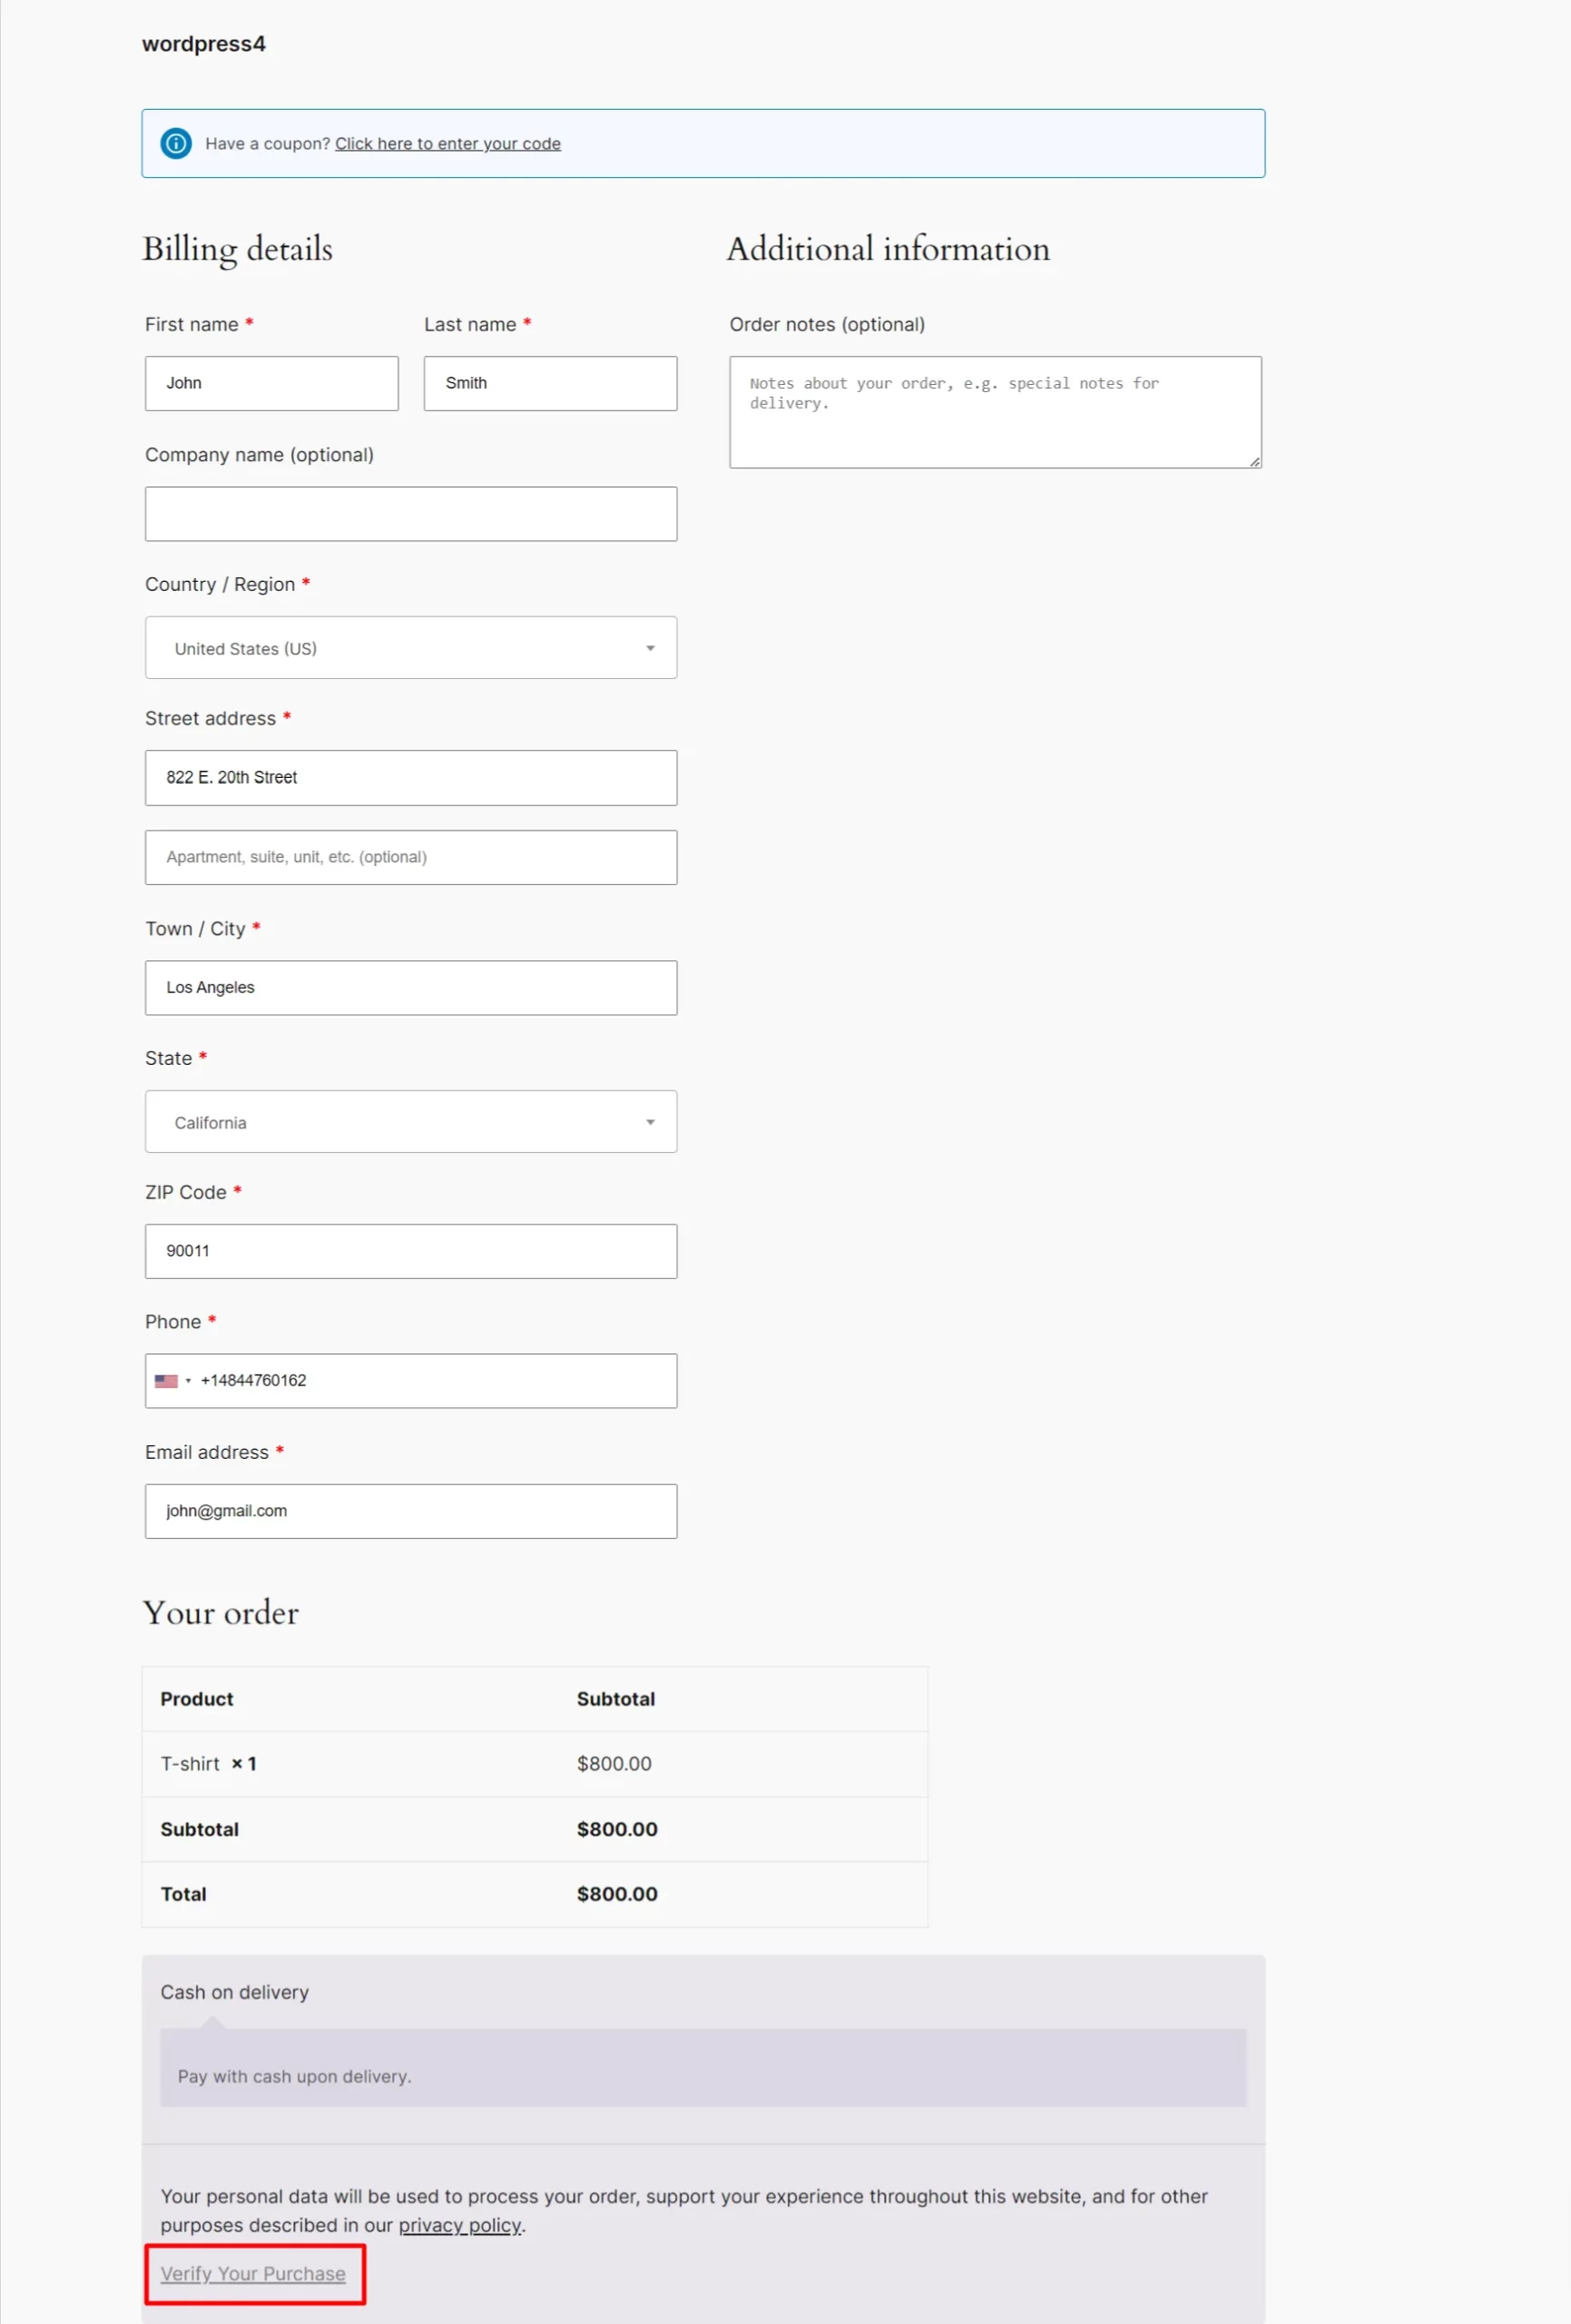 WooCommerce Checkout Form OTP - click on click verify your purchase